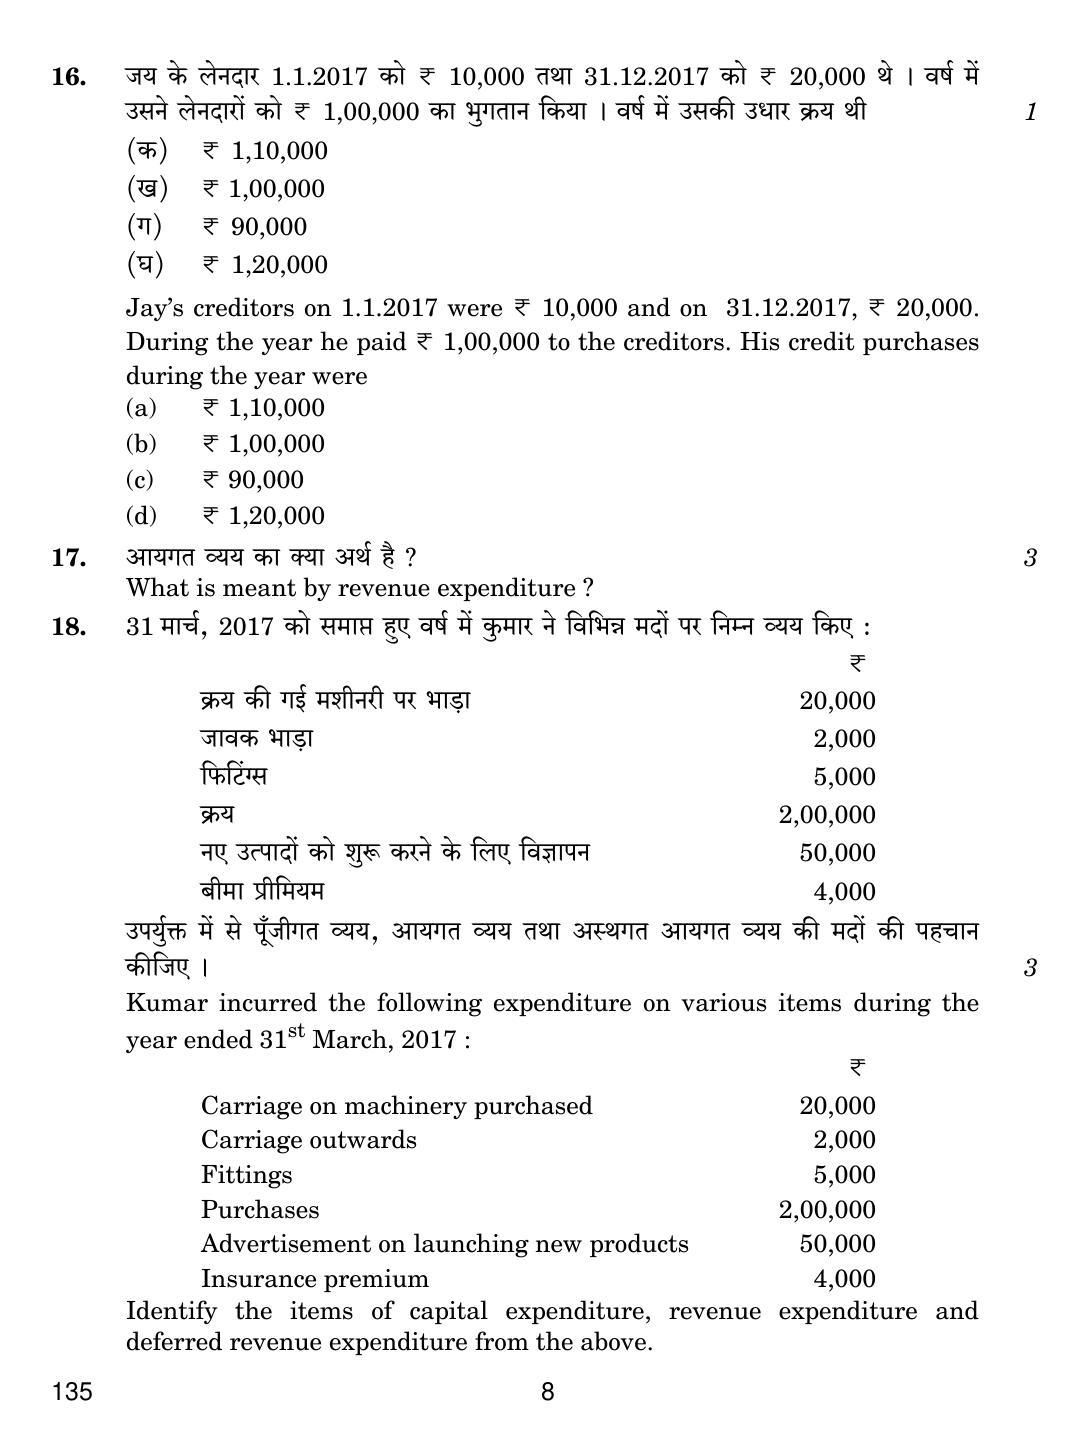 CBSE Class 10 135 ELEMENTS OF BOOK-KEEPING AND ACCOUNTANCY (COMMERCE) 2019 Question Paper - Page 8